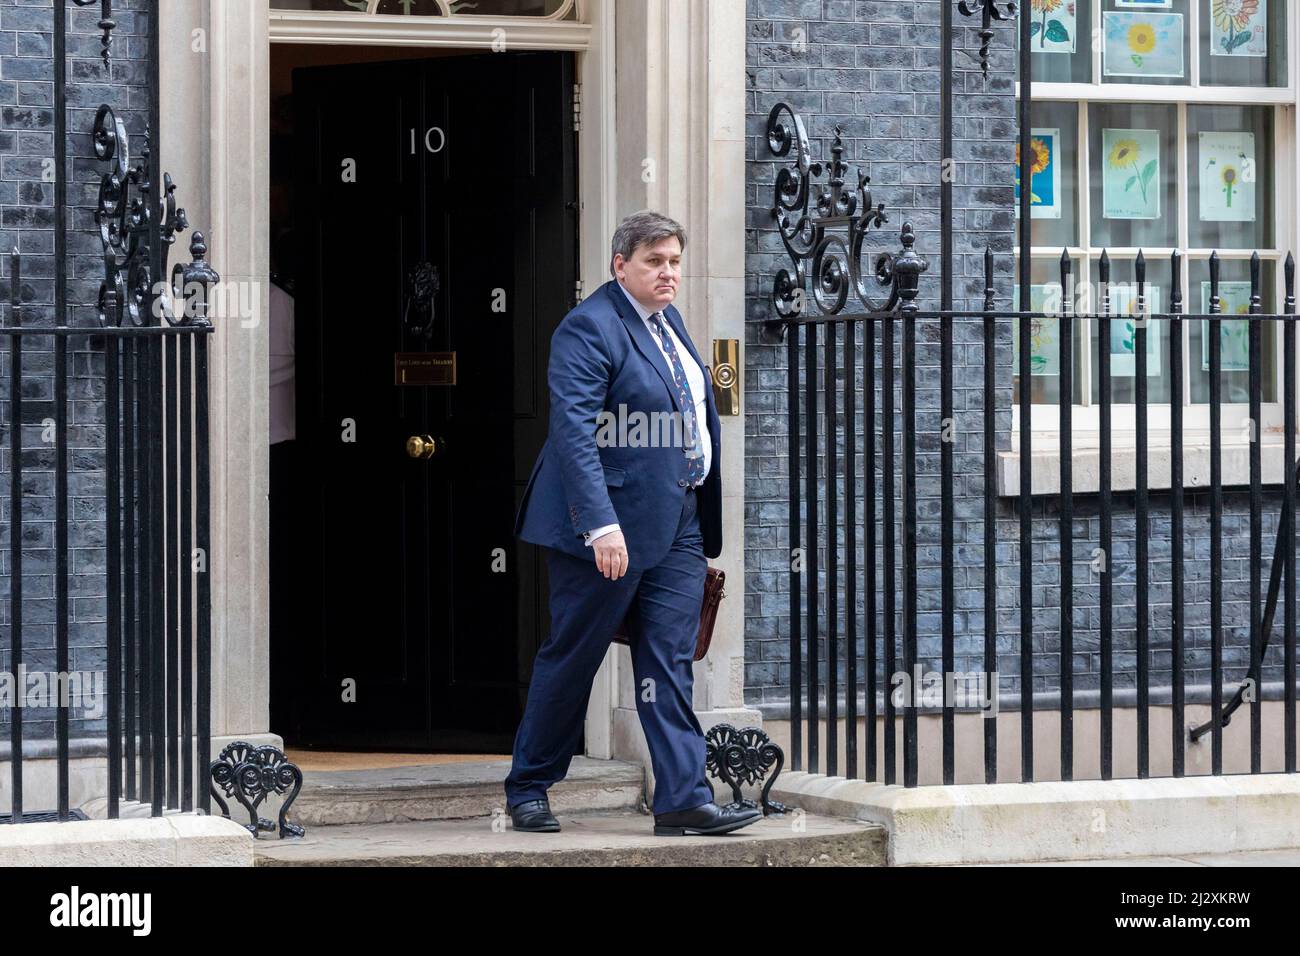 Kit Malthouse MP, Minister of State (Minister for Crime and Policing), is seen at 10 Downing street ahead of weekly cabinet meetings. Stock Photo